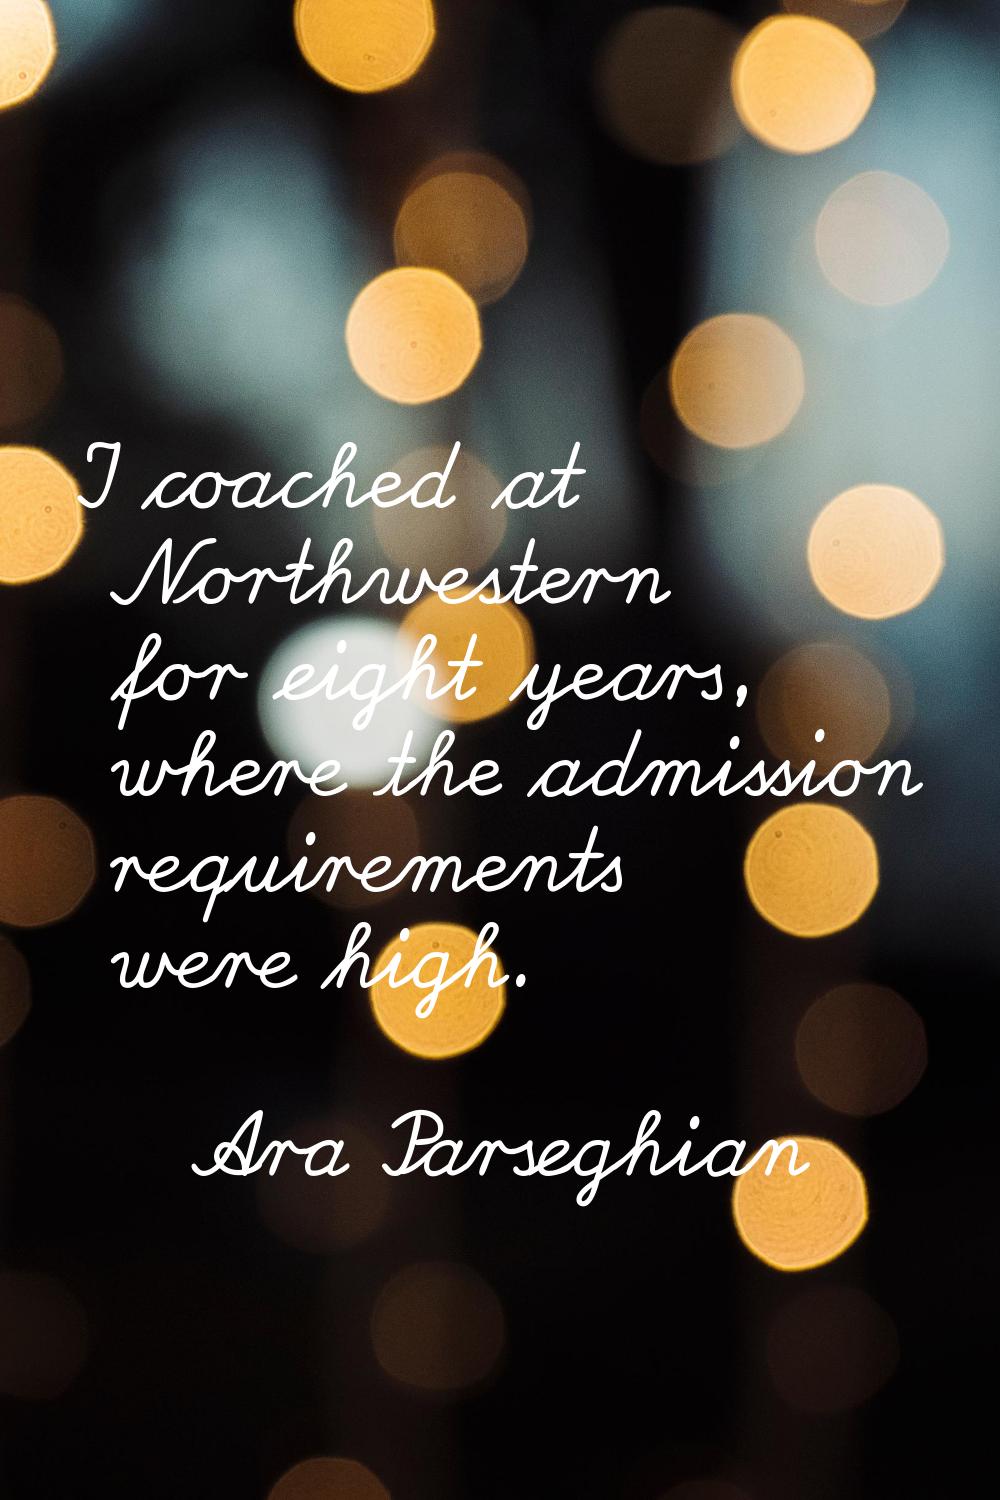 I coached at Northwestern for eight years, where the admission requirements were high.